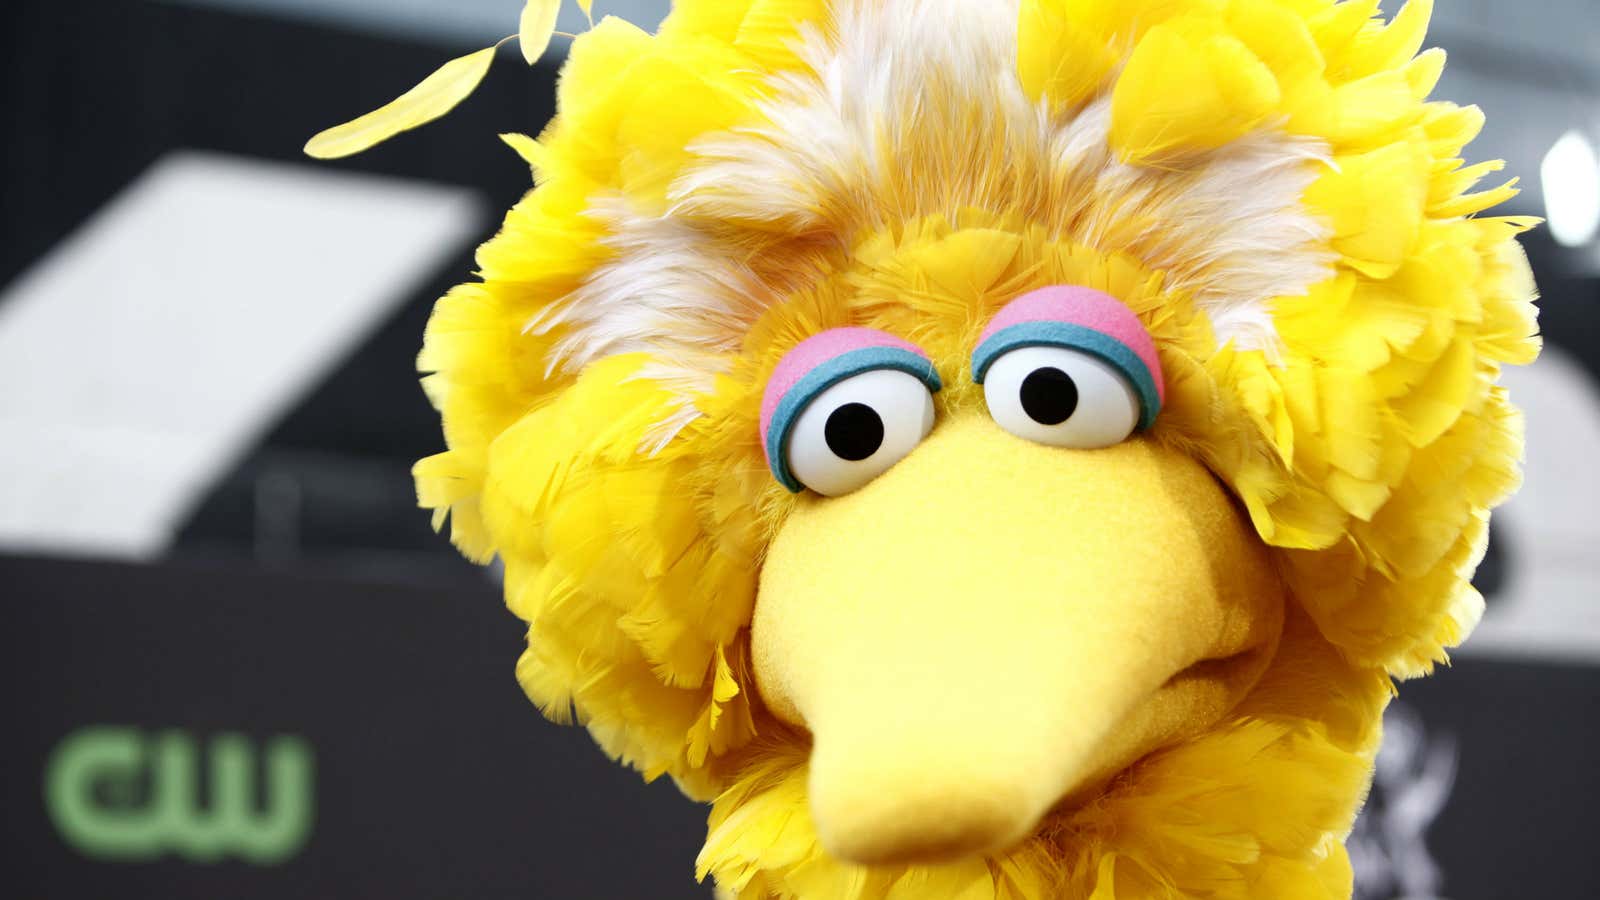 Big Bird to Donald Trump, some interesting characters were invoked in the first US presidential debate